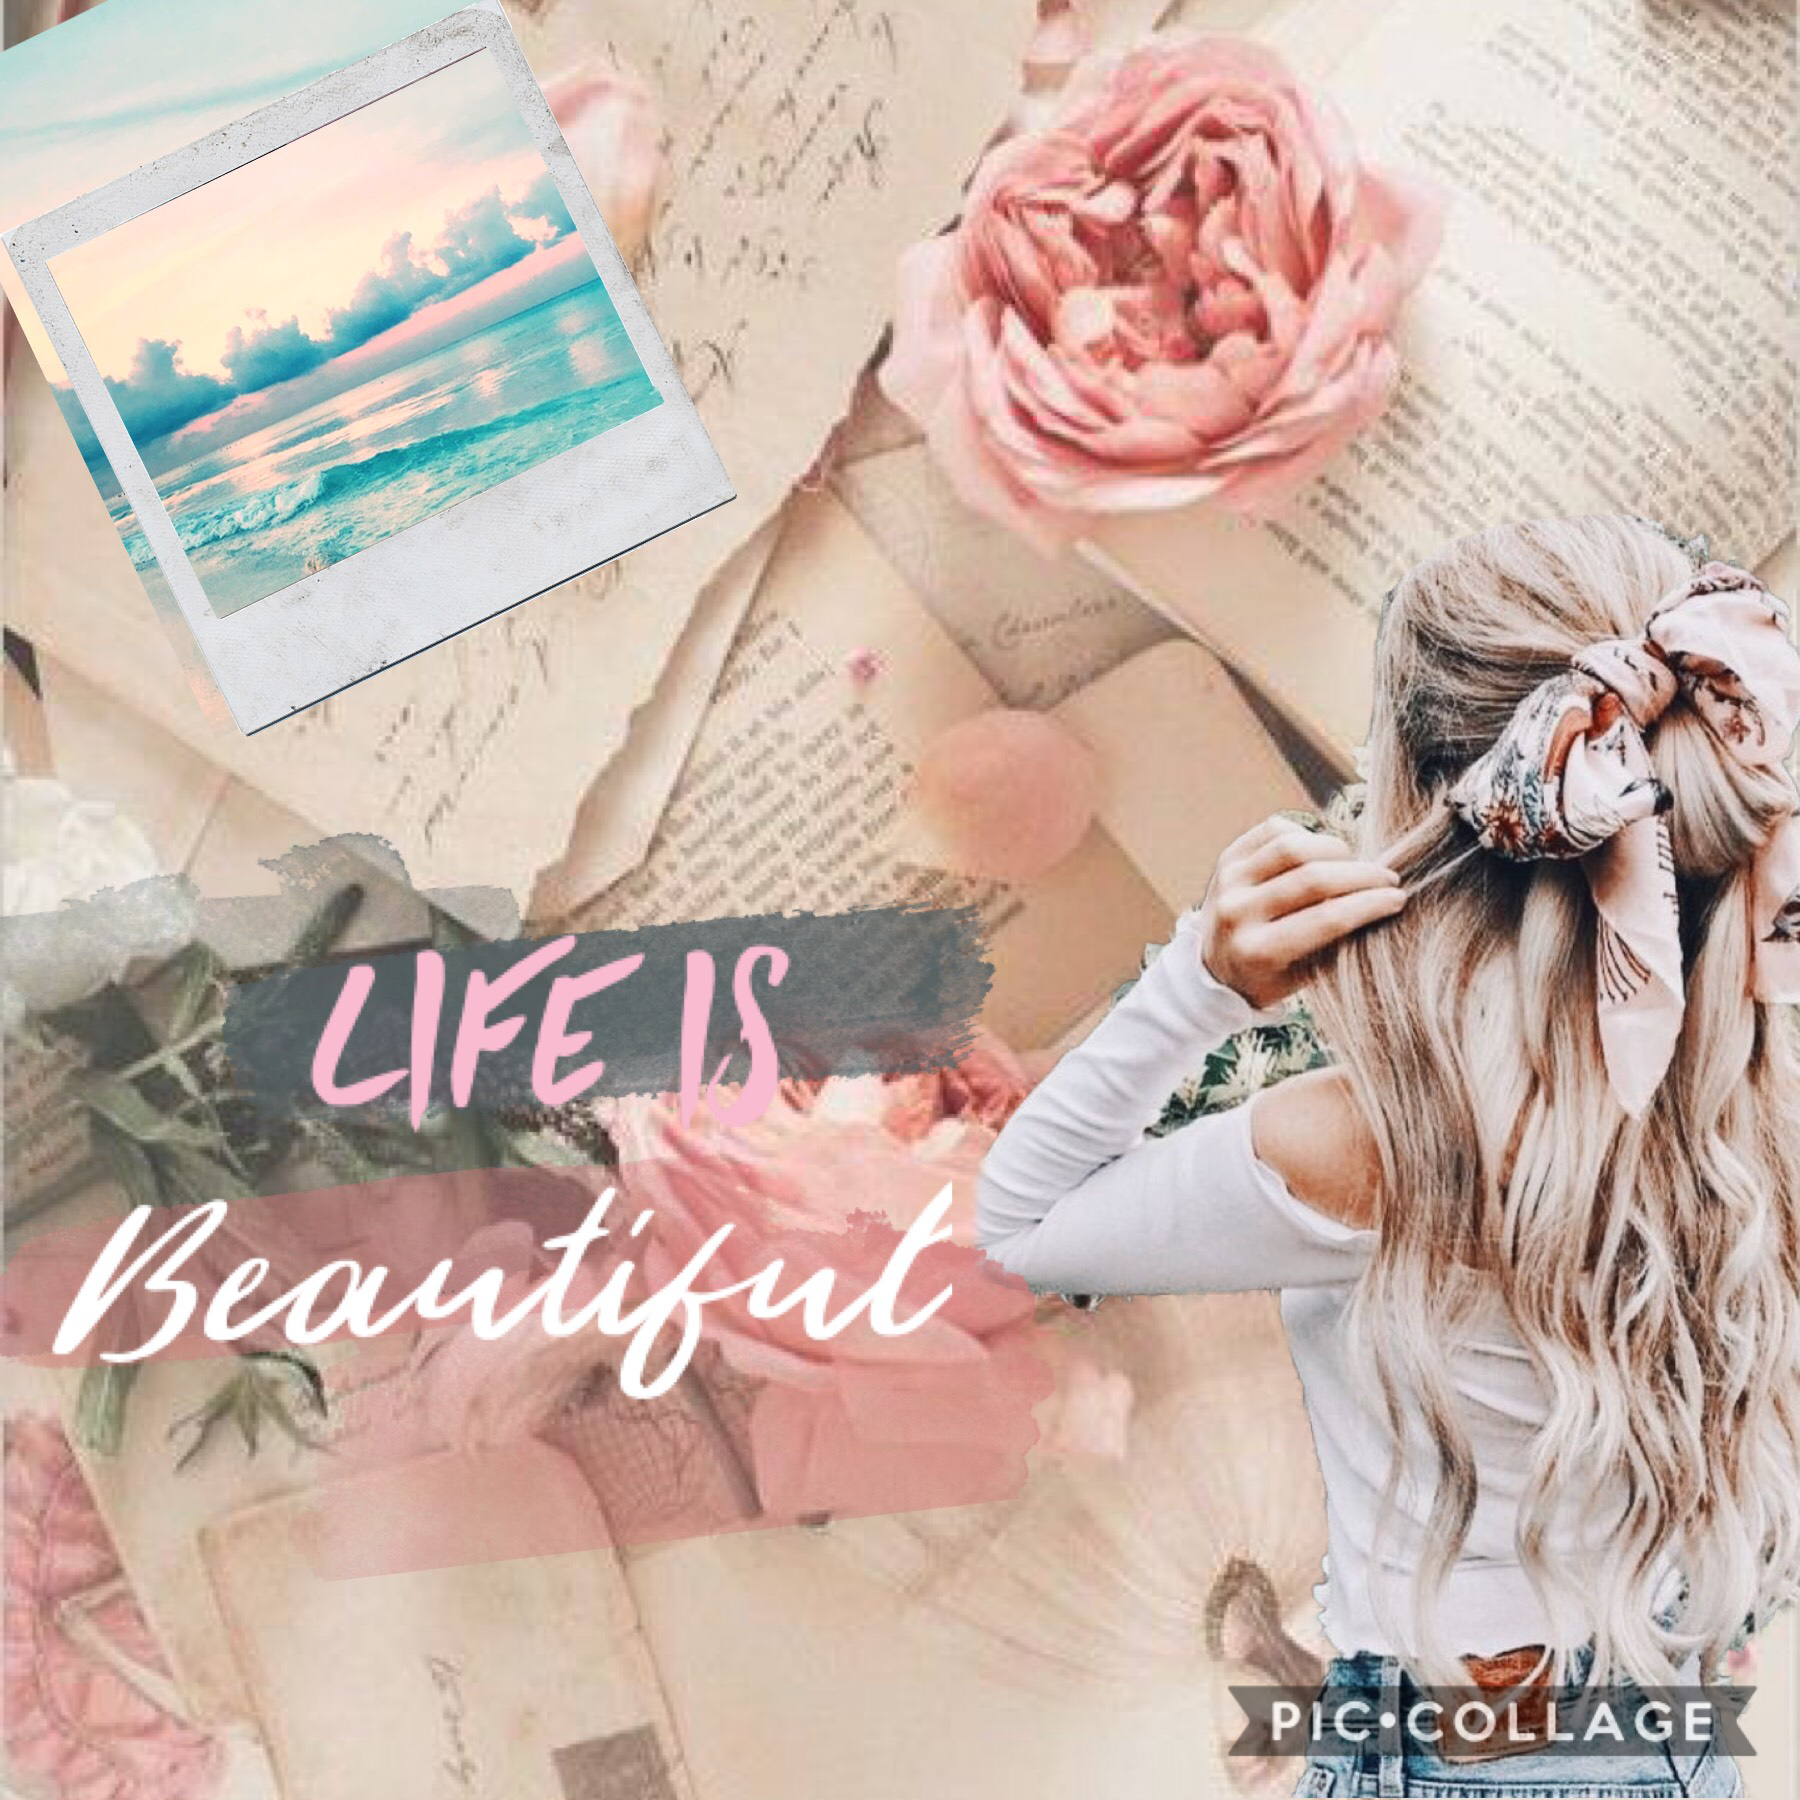 Life is beautiful
The last one I made like this got 20 likes and that’s the most I’ve ever gotten so let’s see if we can get this one to more. Thanks!